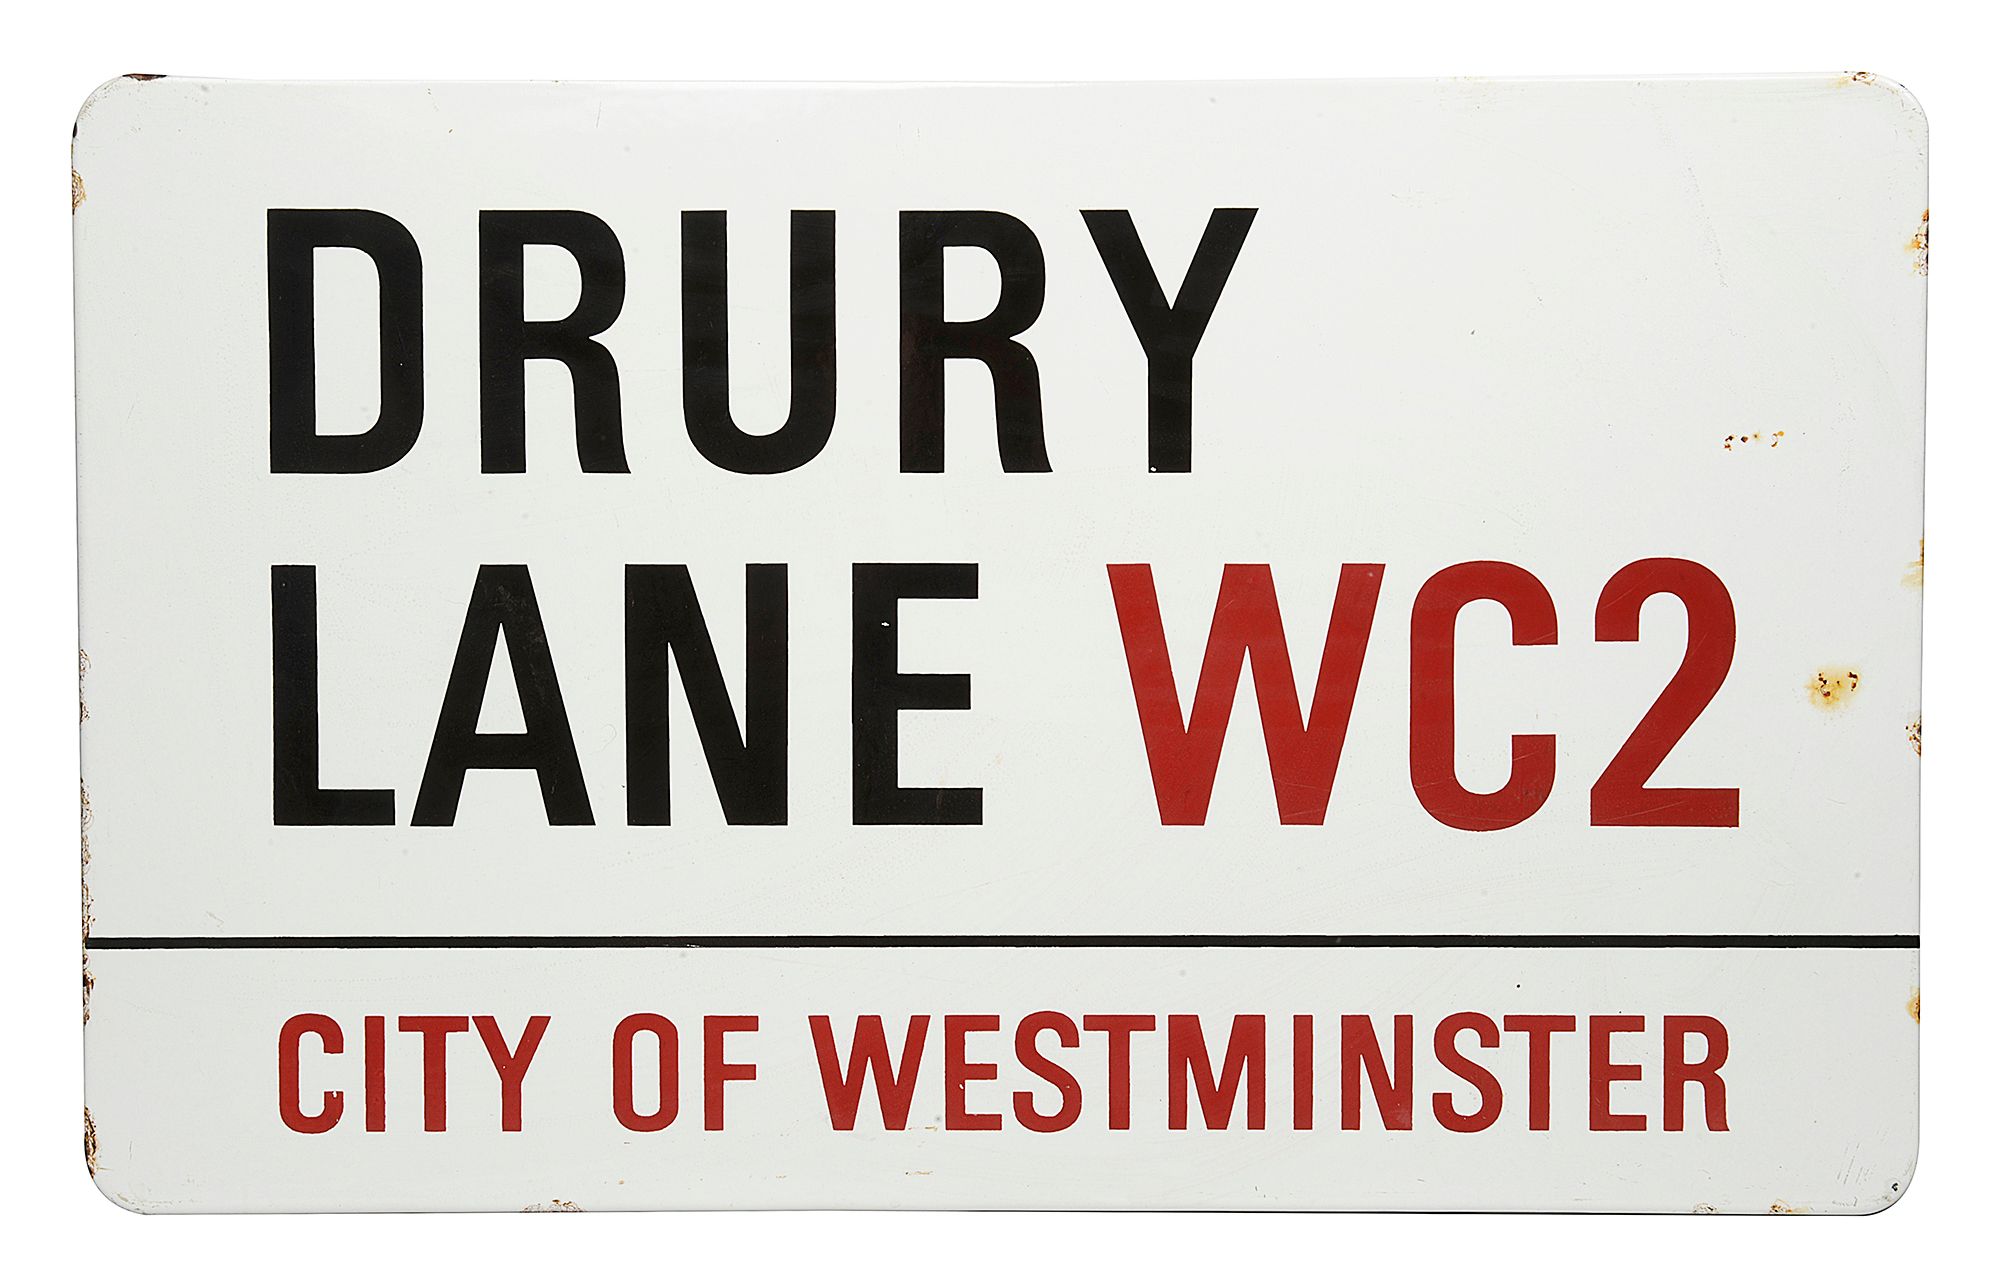 An enamelled iron street sign for Drury Lane WC2, City of Westminster